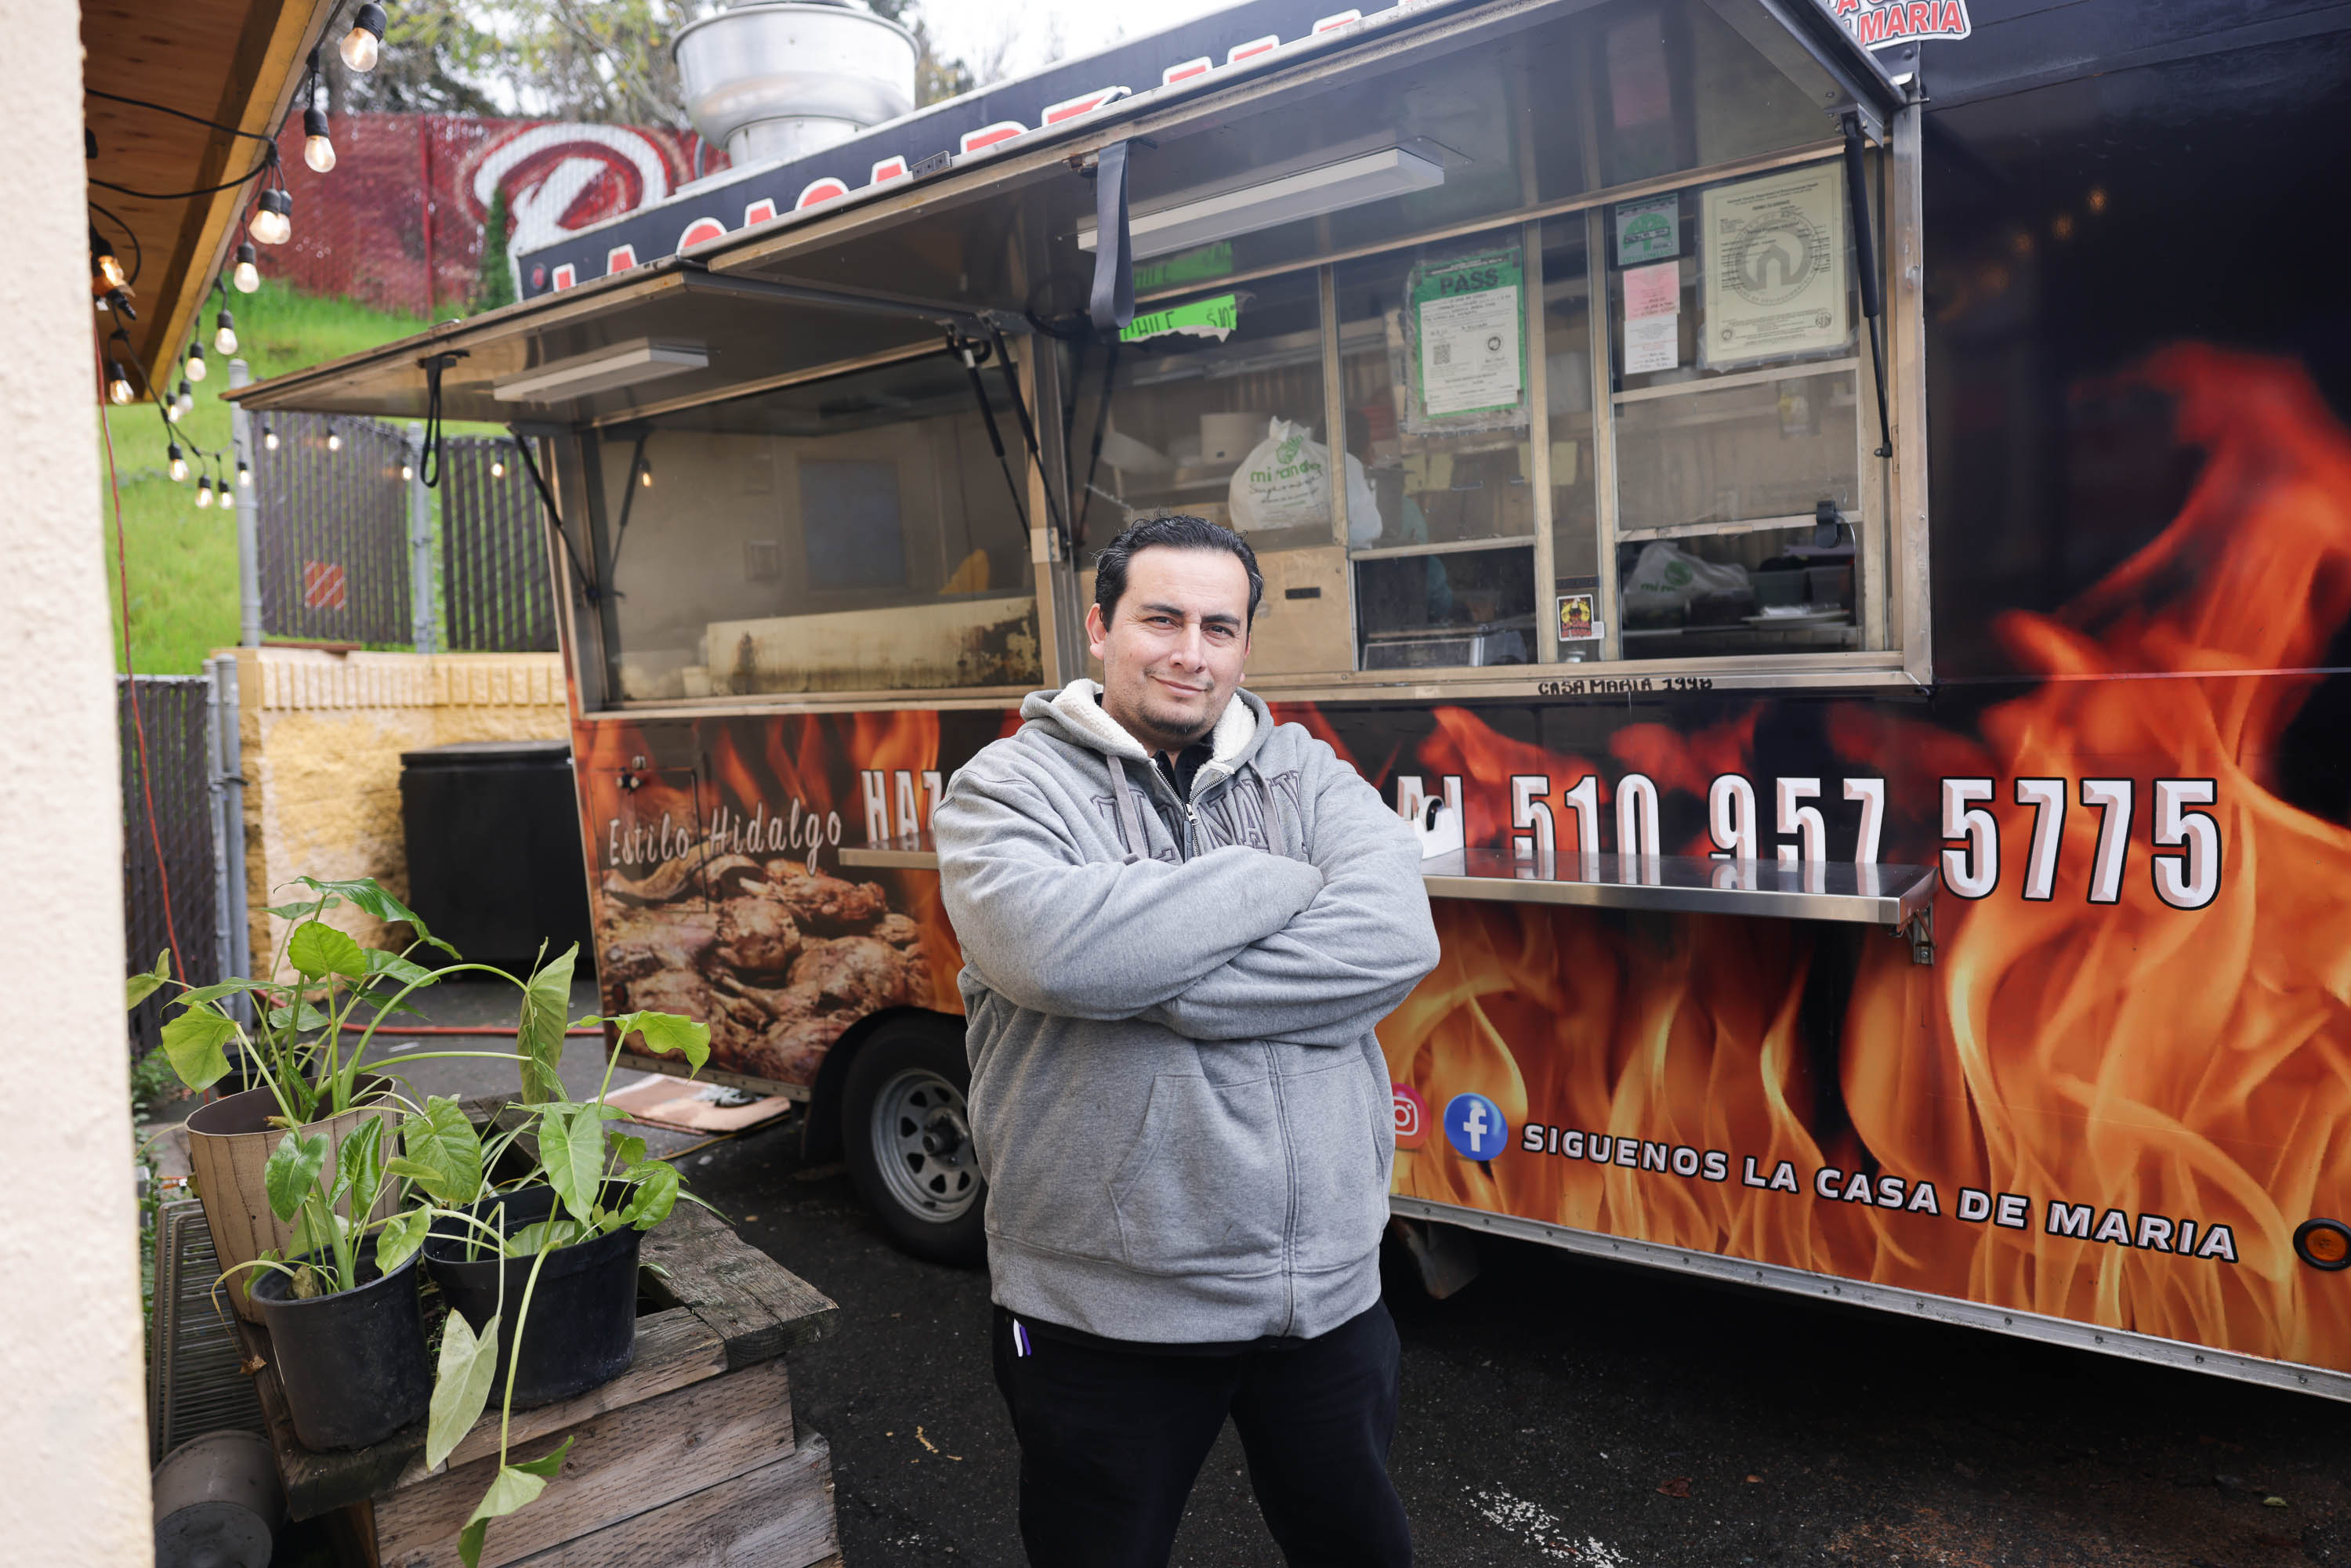 Man with arms crossed stands in front of a food truck with fiery graphics.